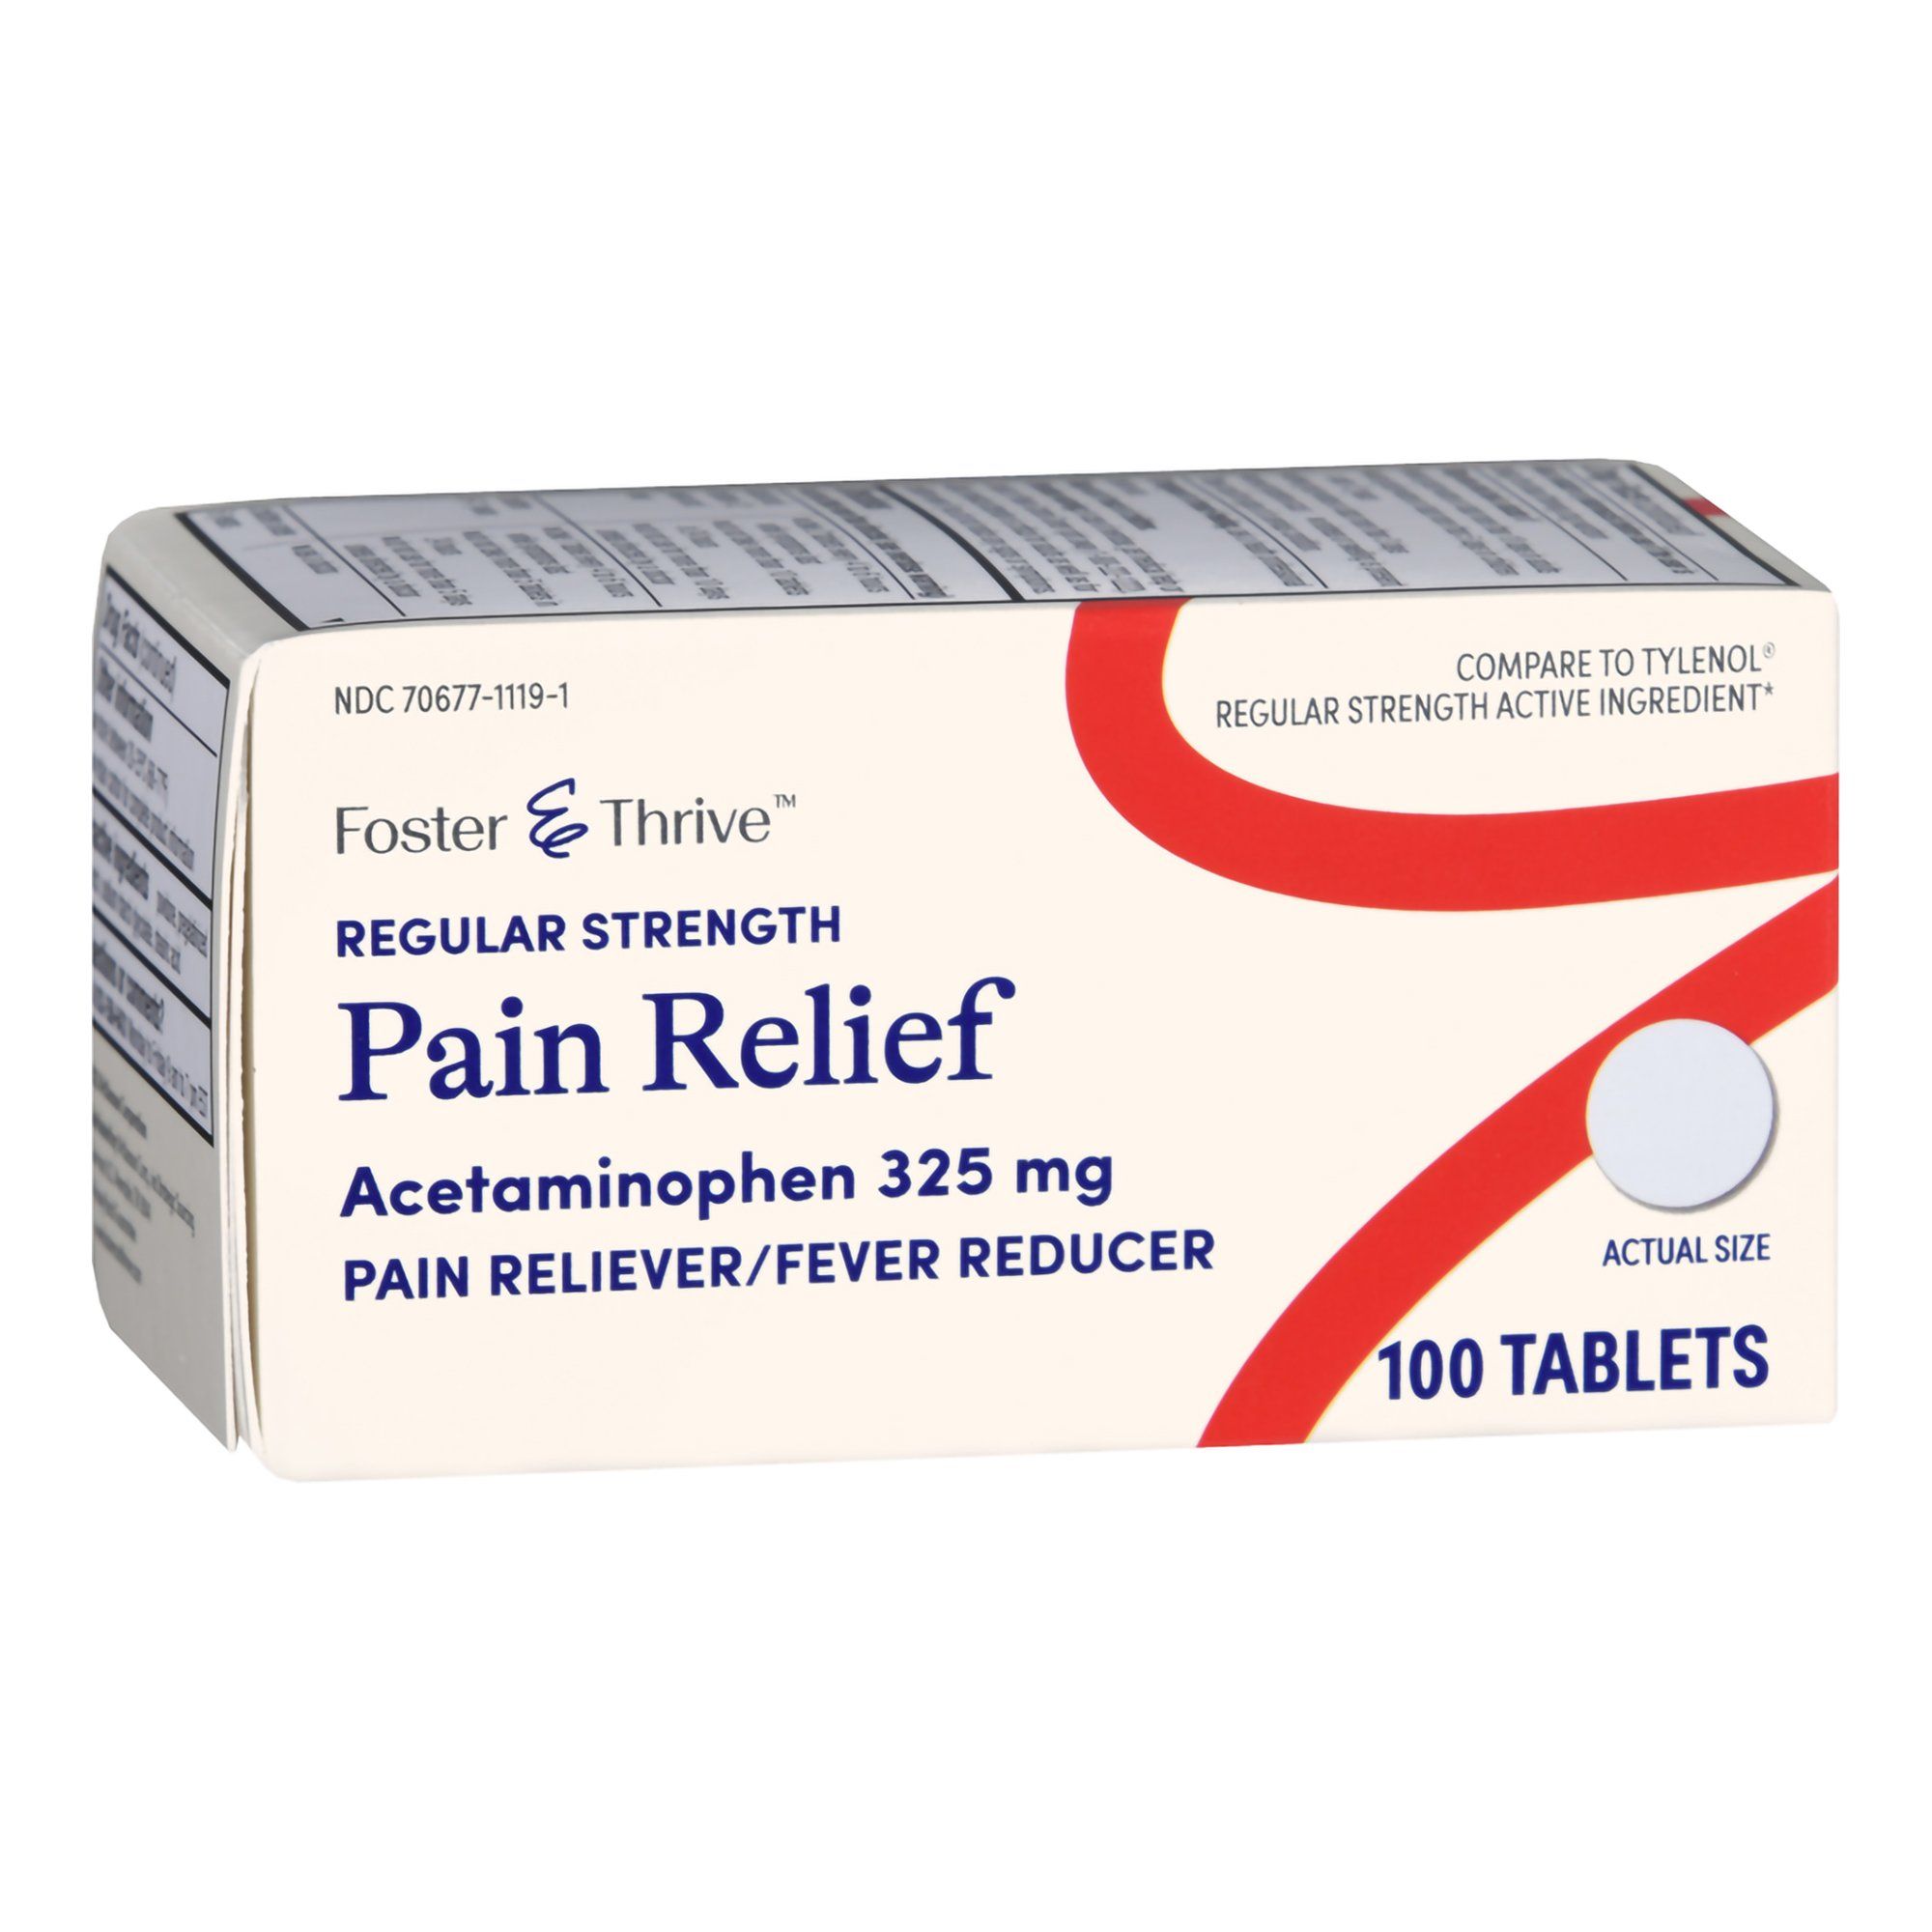 Foster & Thrive Regular Strength Pain Relief Acetaminophen Tablets, 325 mg - 100 ct